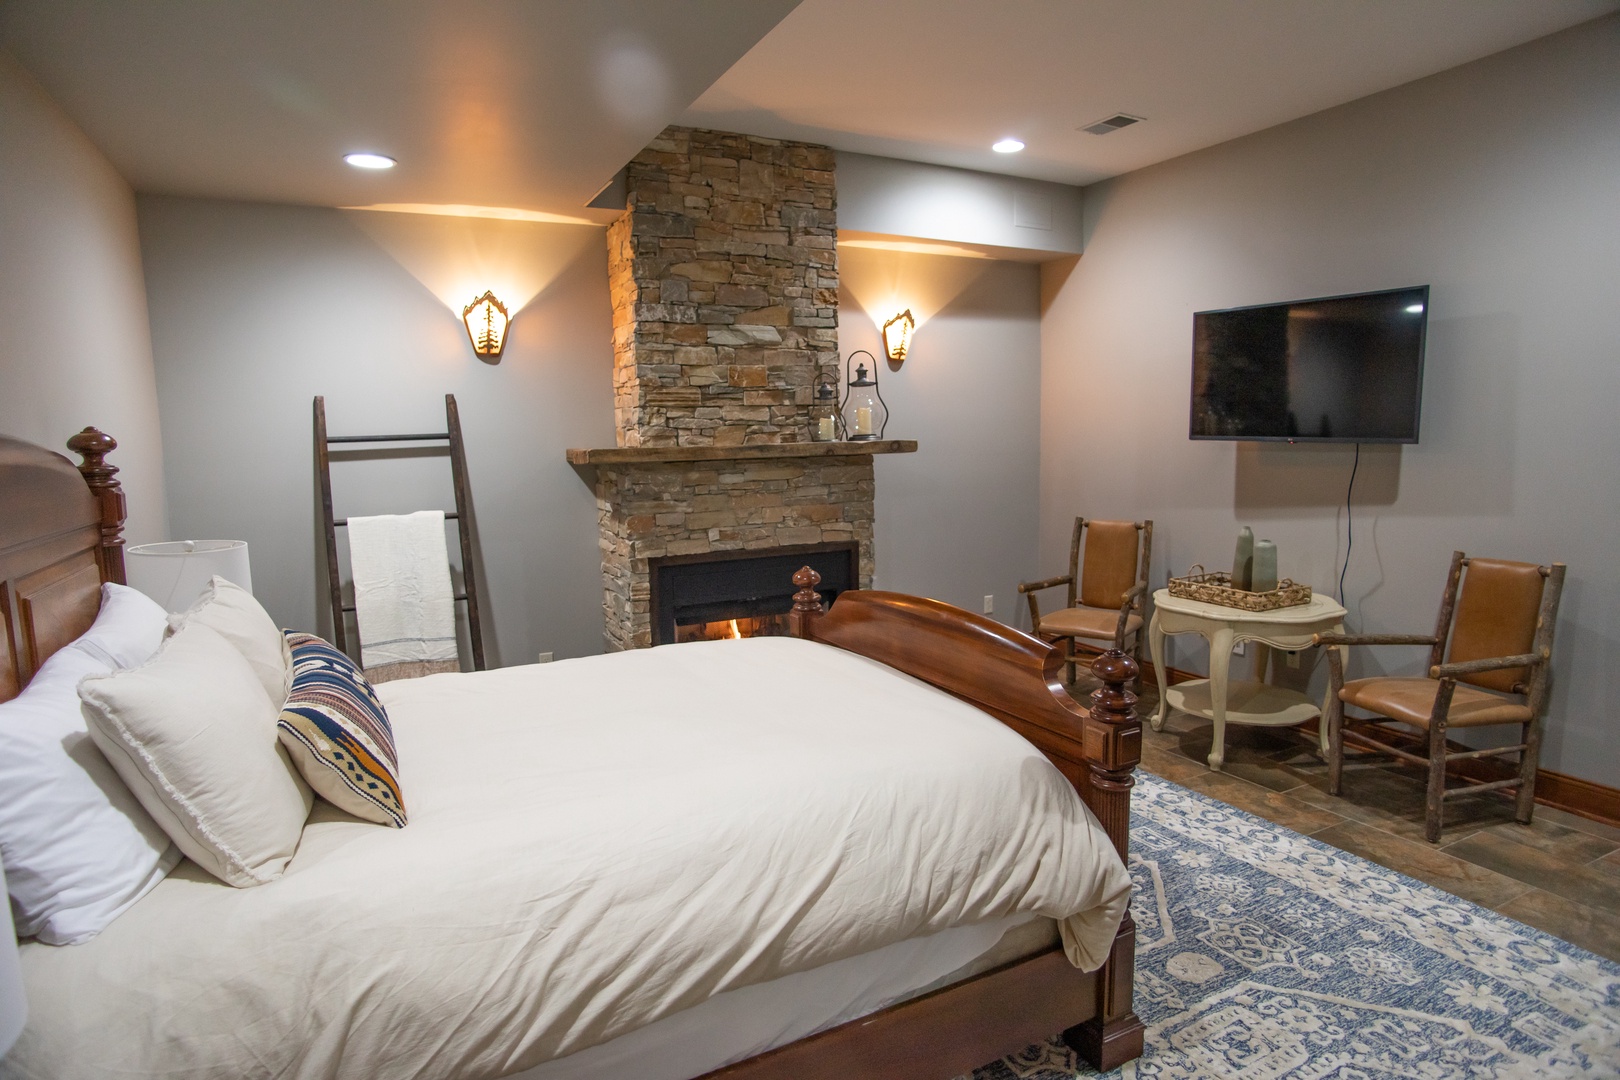 The main bedroom has everything needed for an evening retreat away from the others.